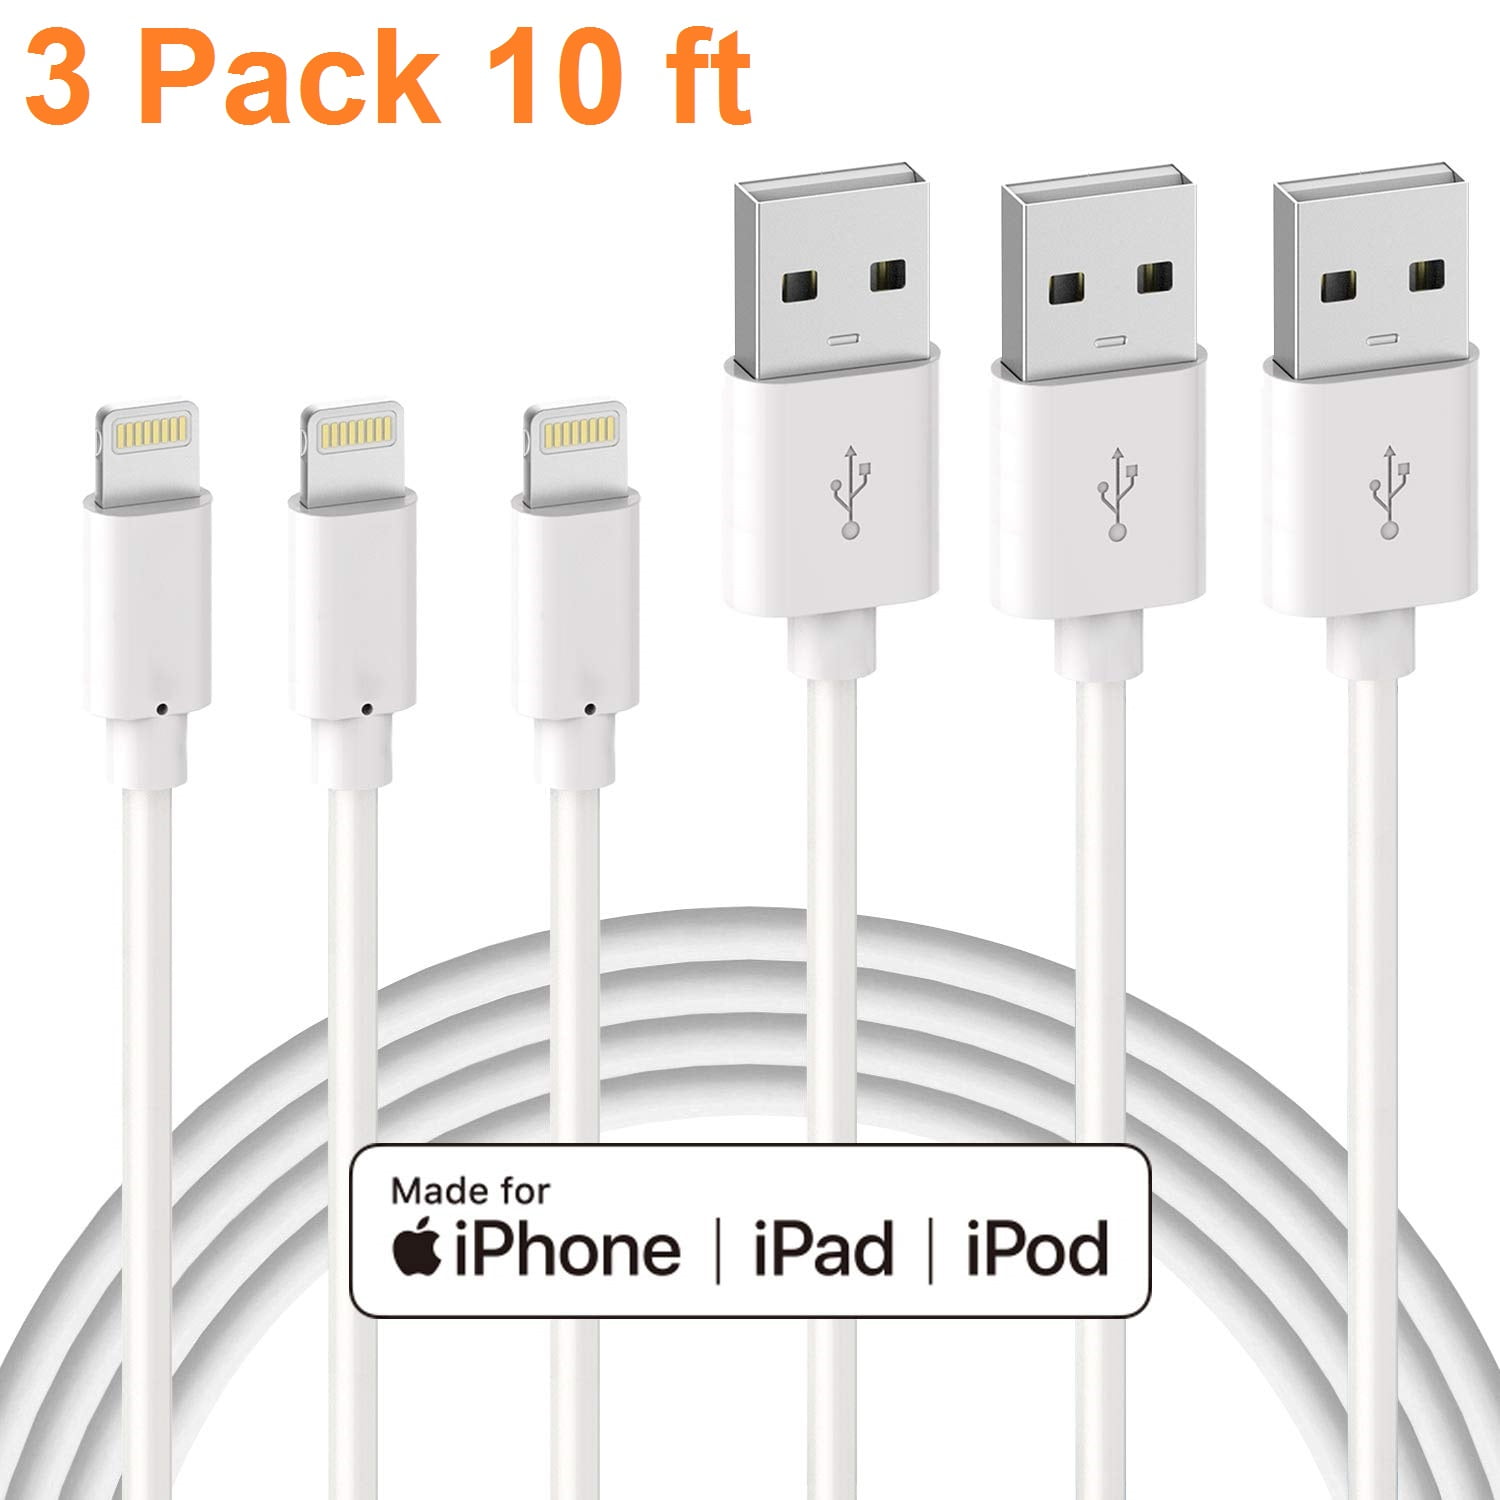 iPhone Cable Set Truwire Original Size 2 Pack 3FT USB Cable Compatible with iPhone 11,Pro,Pro Max,Xs,Xs Max,XR,X,8,8 Plus,7,7 Plus,6S,6S Plus,iPad Air,Mini/iPod Touch/Case 